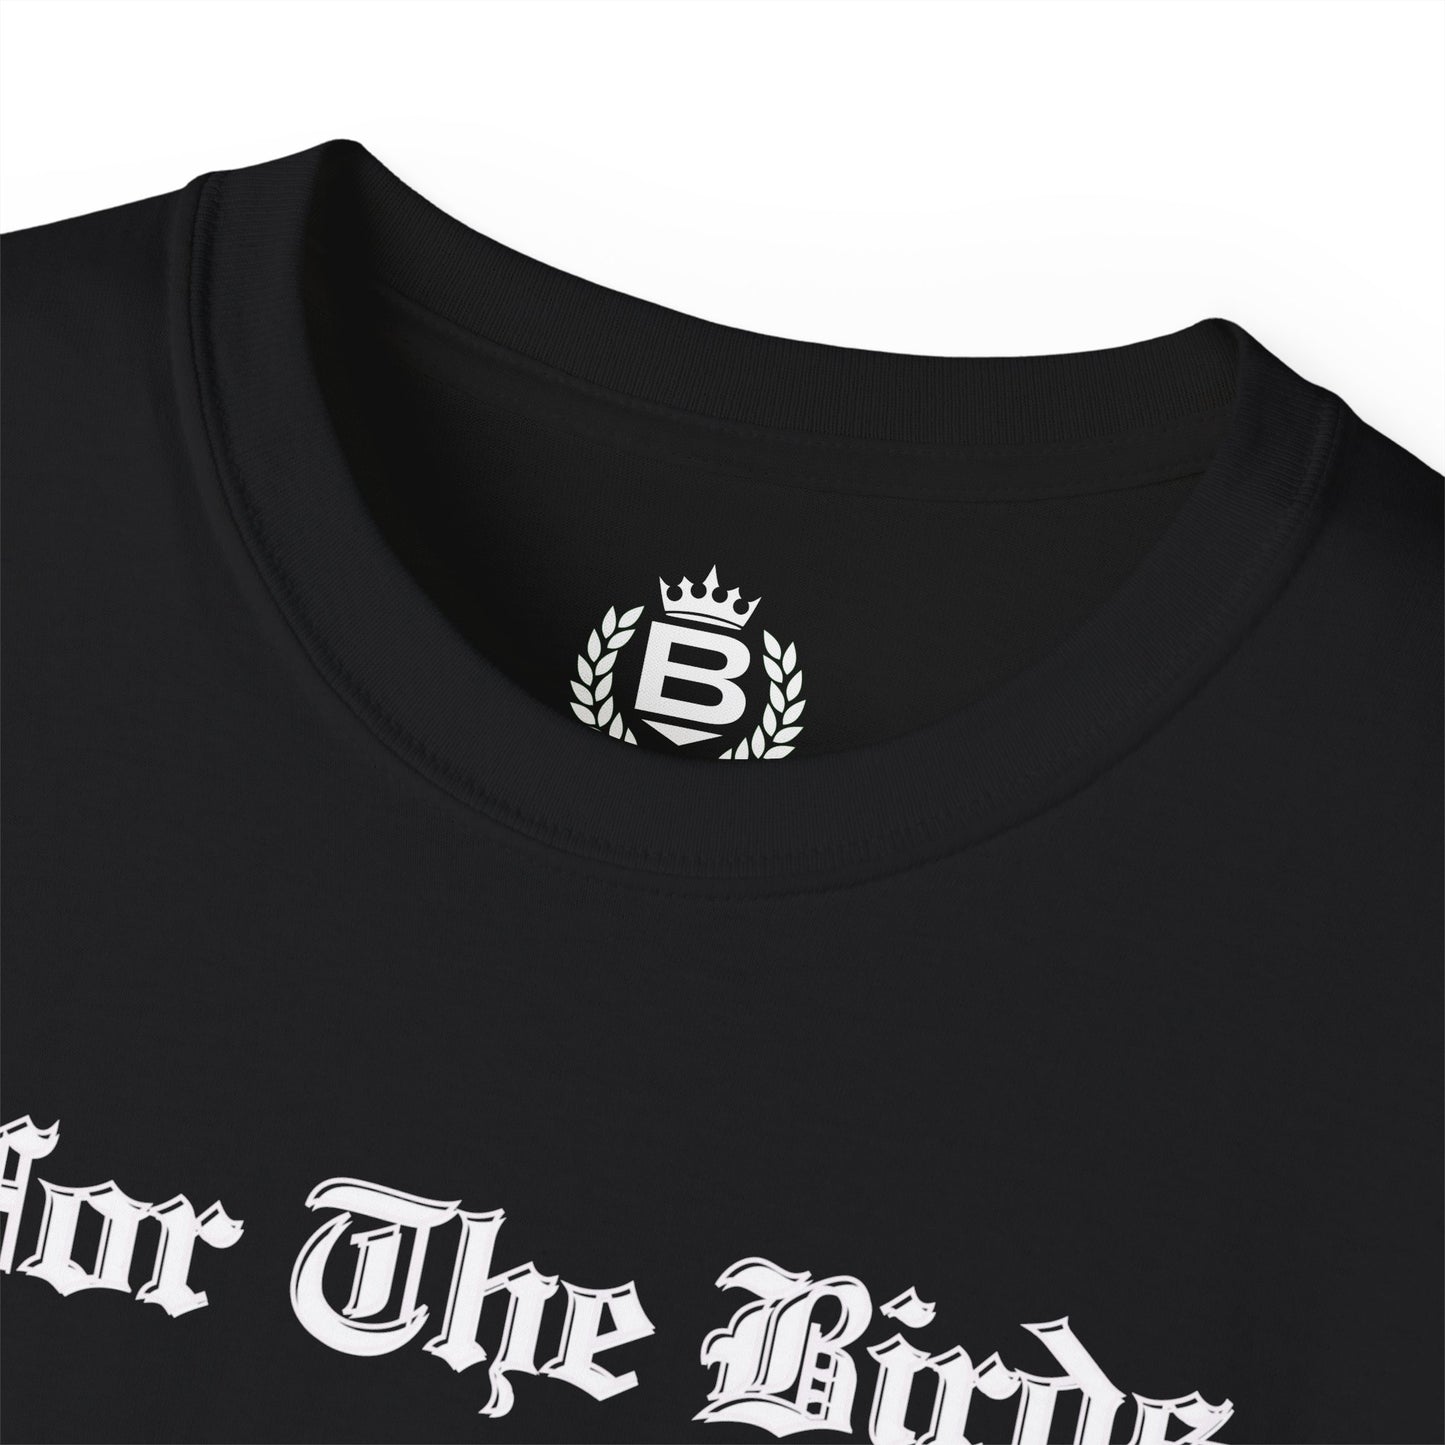 For The Birds Graphic Tee